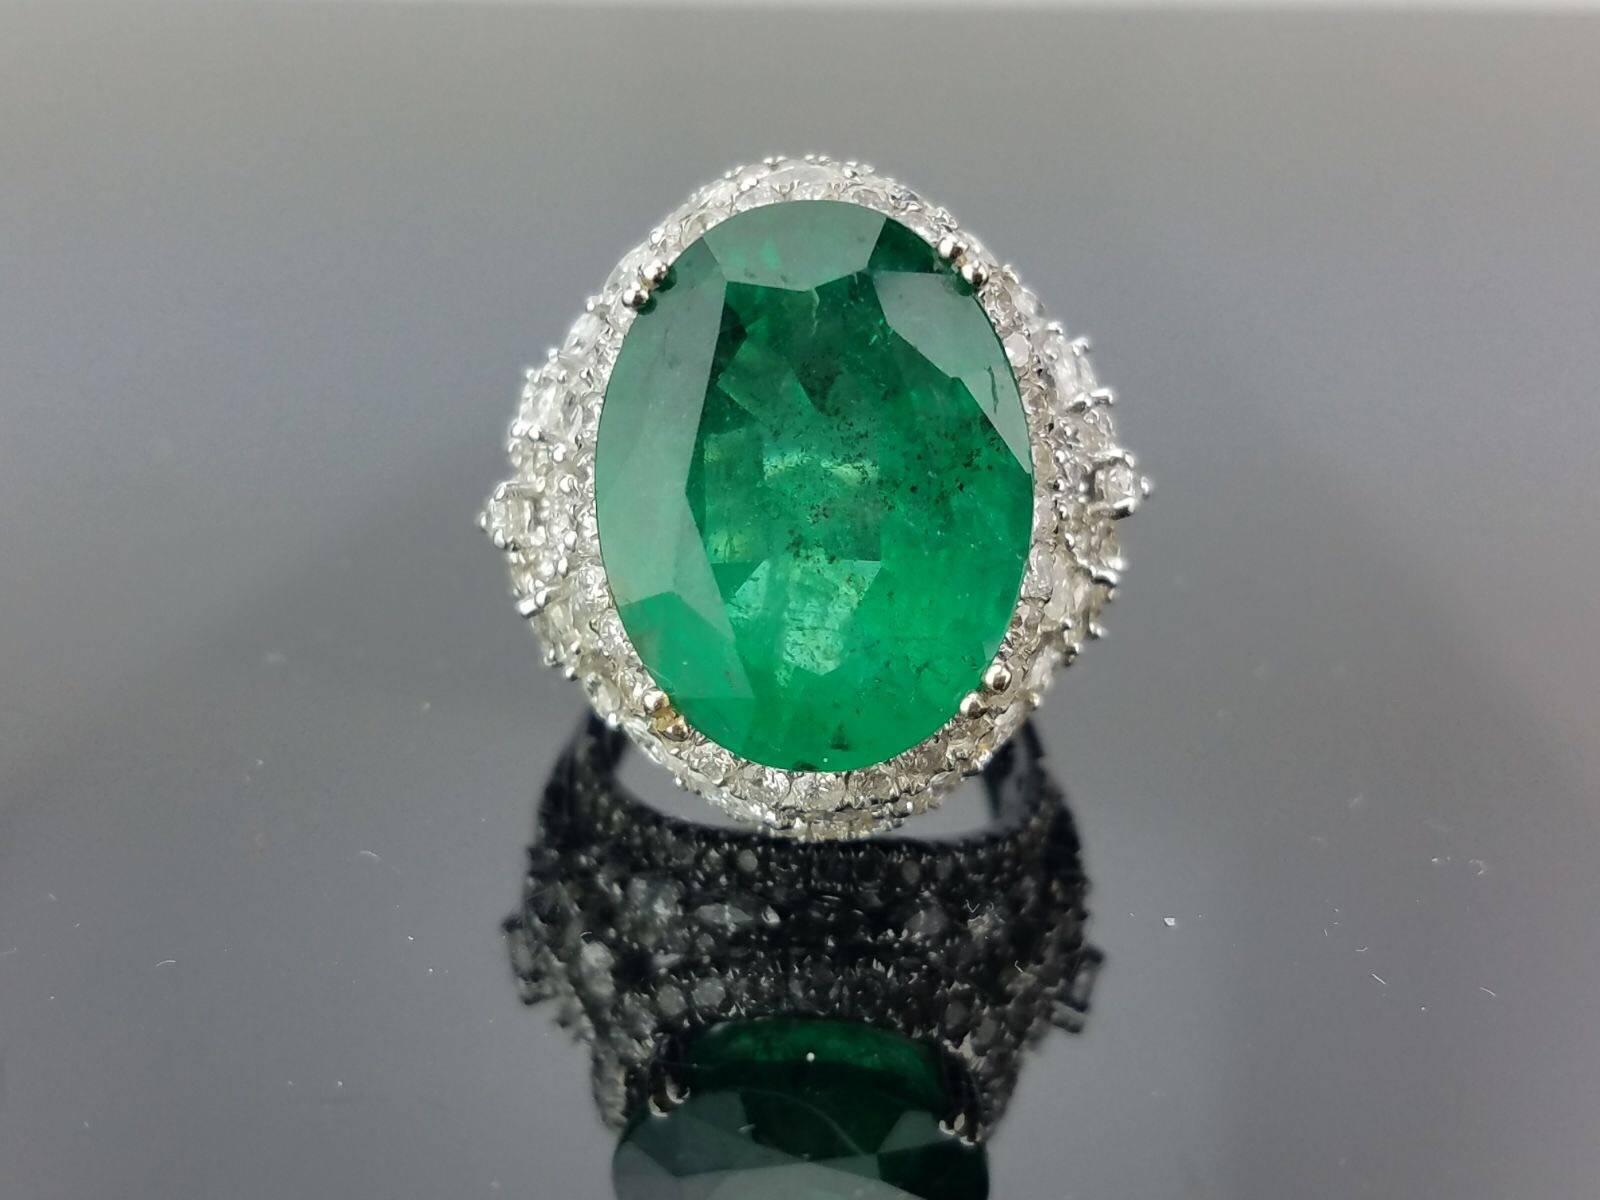 Stone Details: 
Stone: Zambian Emerald
Cut: Oval
Carat Weight: 15.79 Carat

Diamond Details: 
Total Carat Weight: 3.08 carat
Quality: VS/SI , H/I

18K Gold: 16.10 grams 

Currently a ring size US 7, but we can resize the ring for you without added